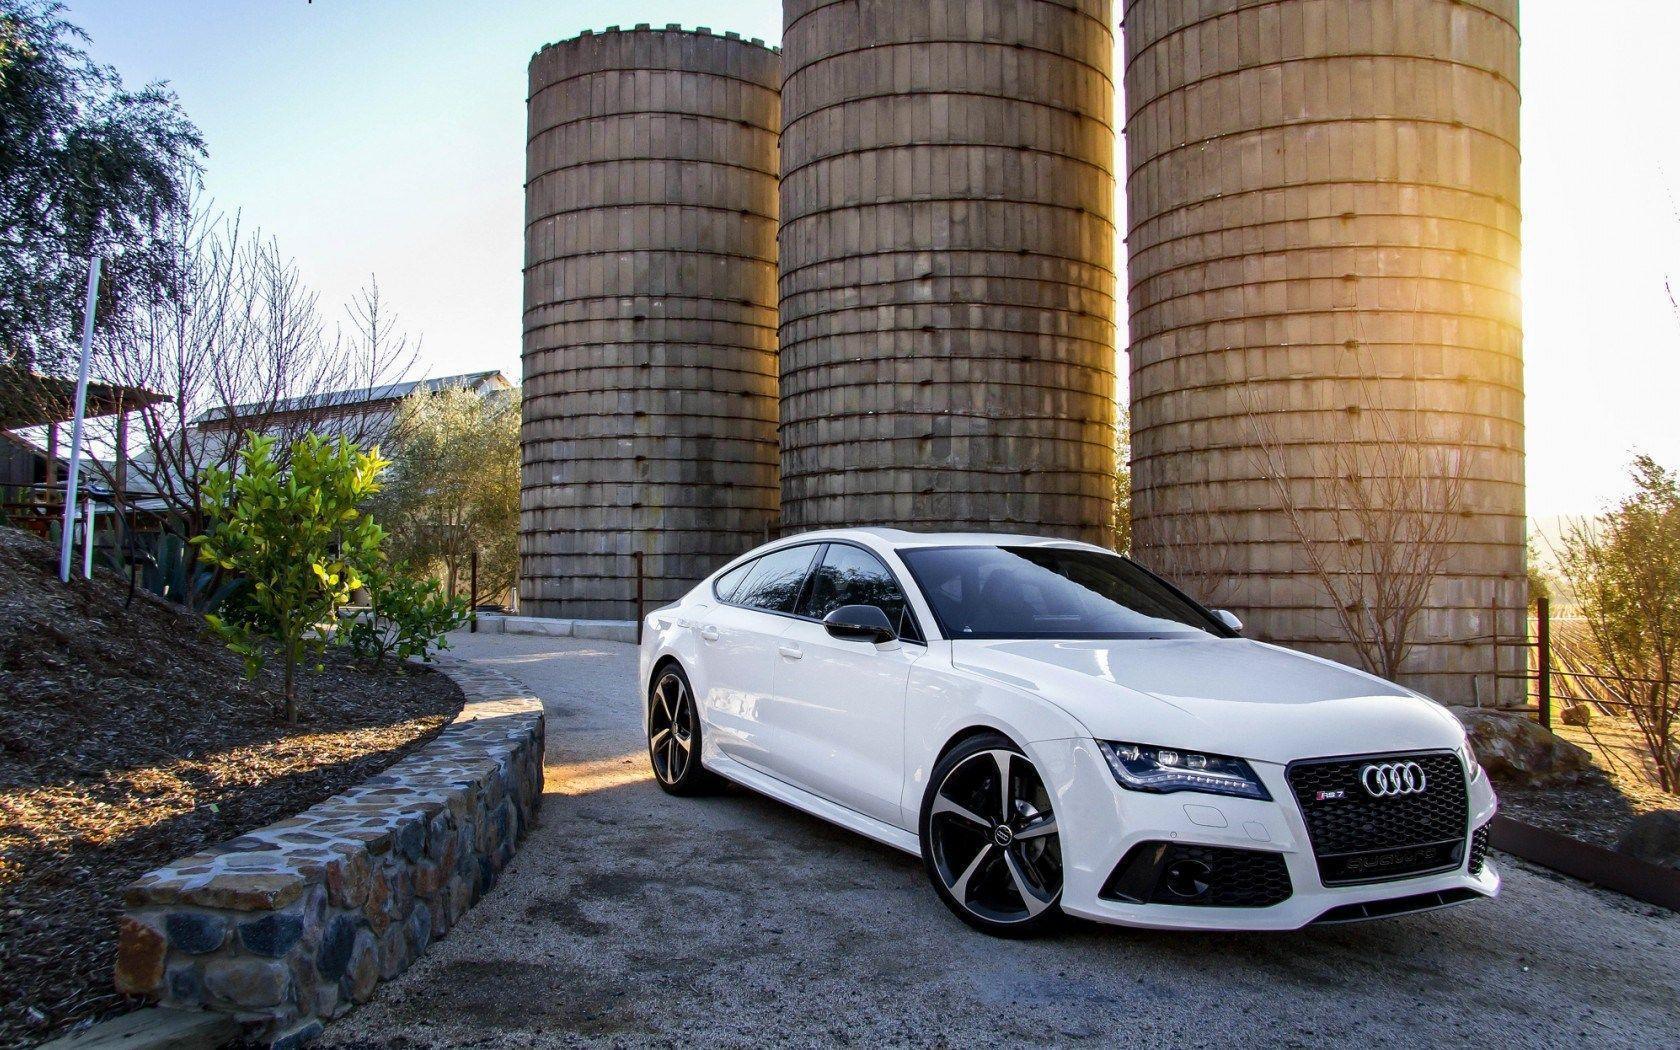 Audi Rs7 Wallpapers Top Free Audi Rs7 Backgrounds Wallpaperaccess